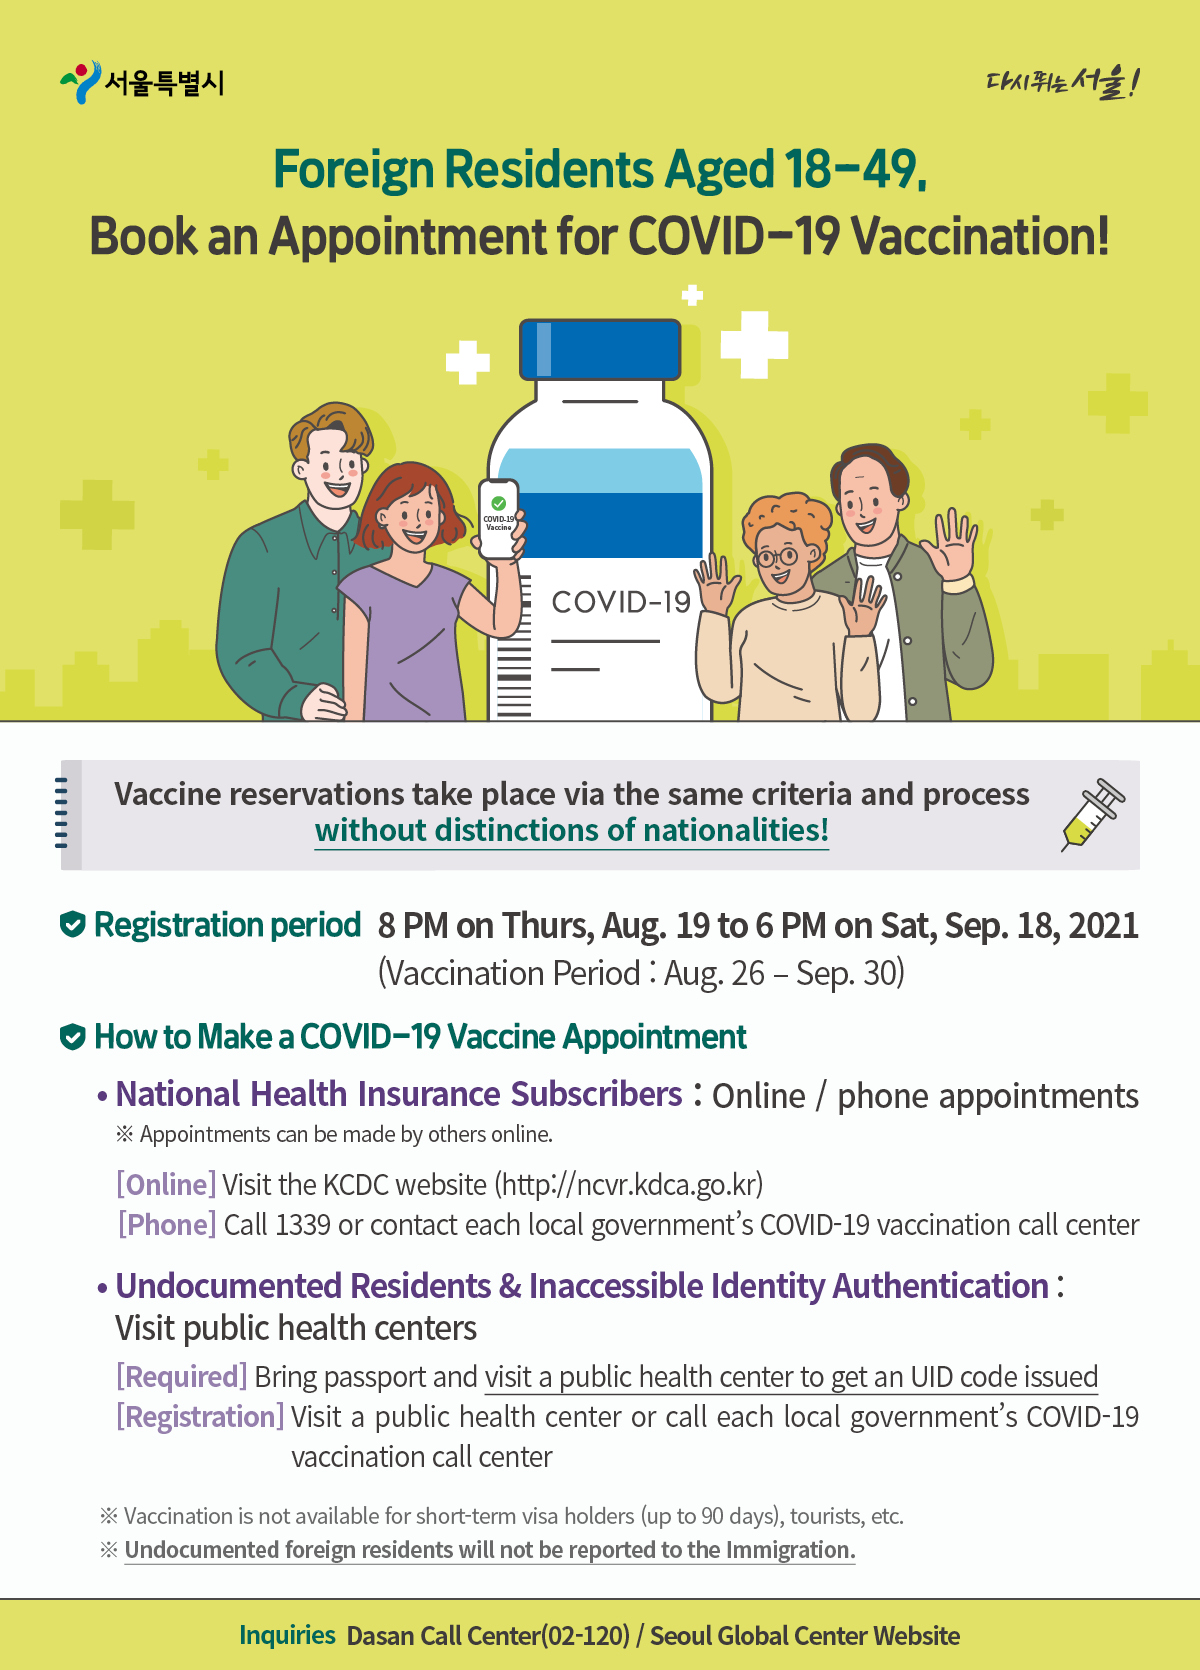 Foreign residents Aged 18-49, Book an Appointment for COVID-19 Vaccination! ENGLISH POSTER